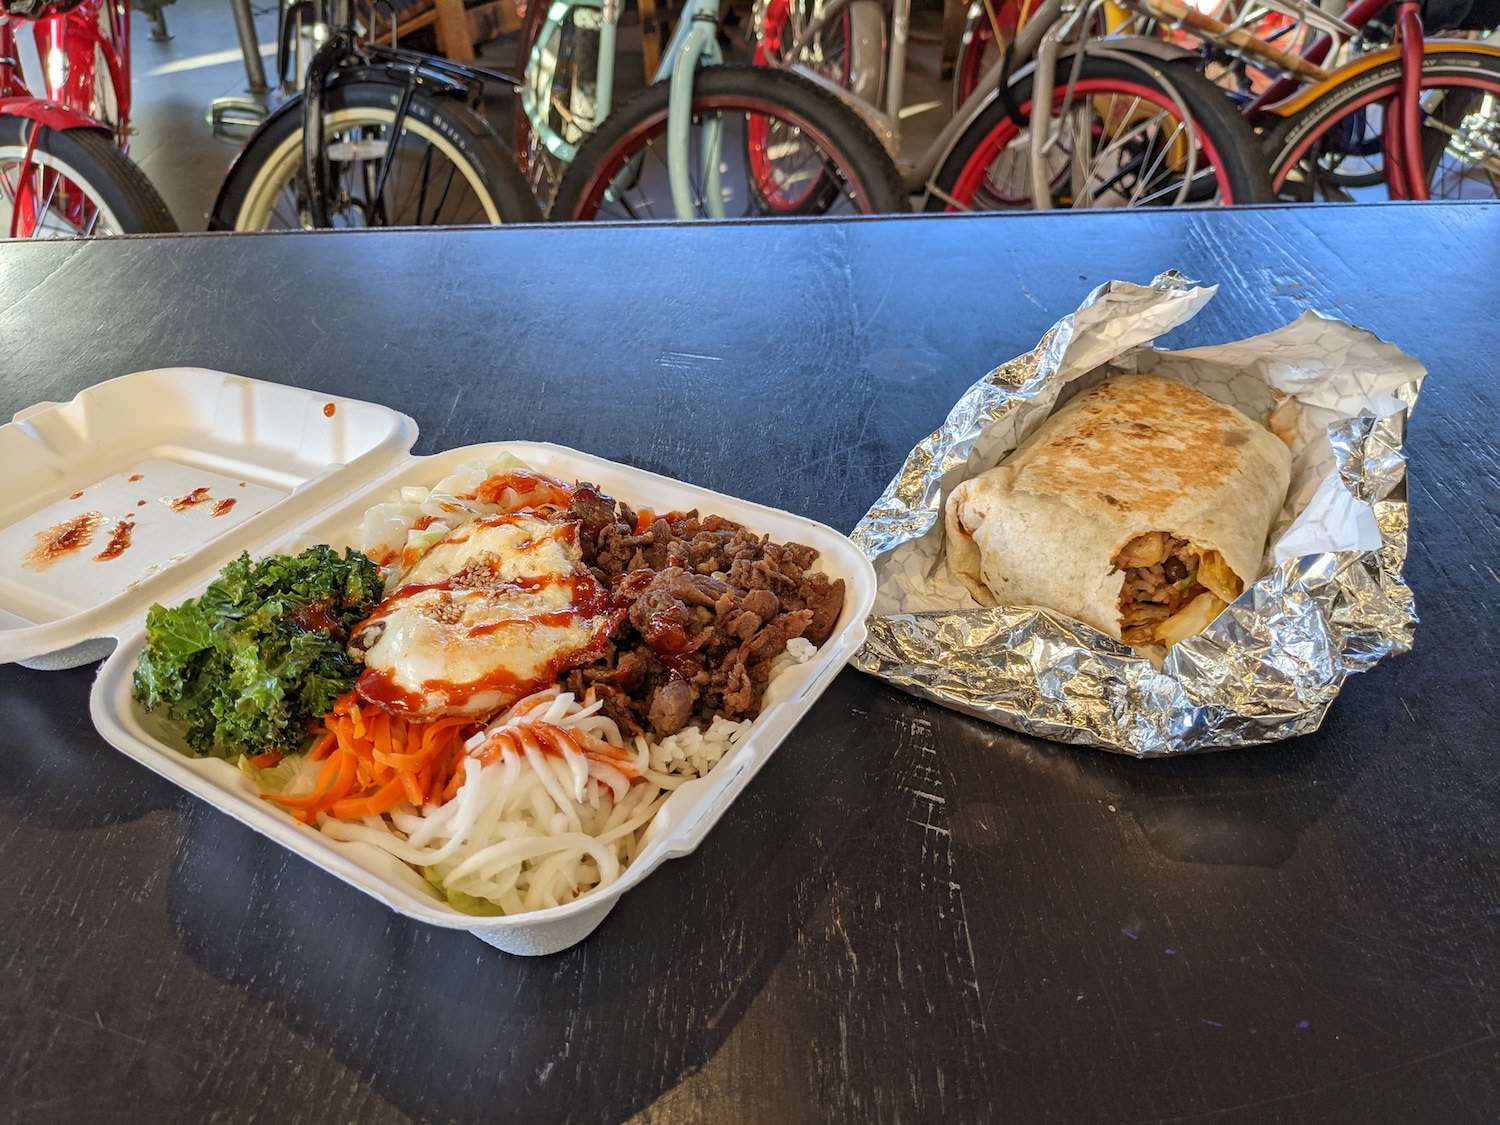 Beef bibimbap is sitting in a container on top of a black table at New Belgium Brewing in Asheville, NC. A burrito is also on the table partially wrapped in foil. Bikes are in the background.